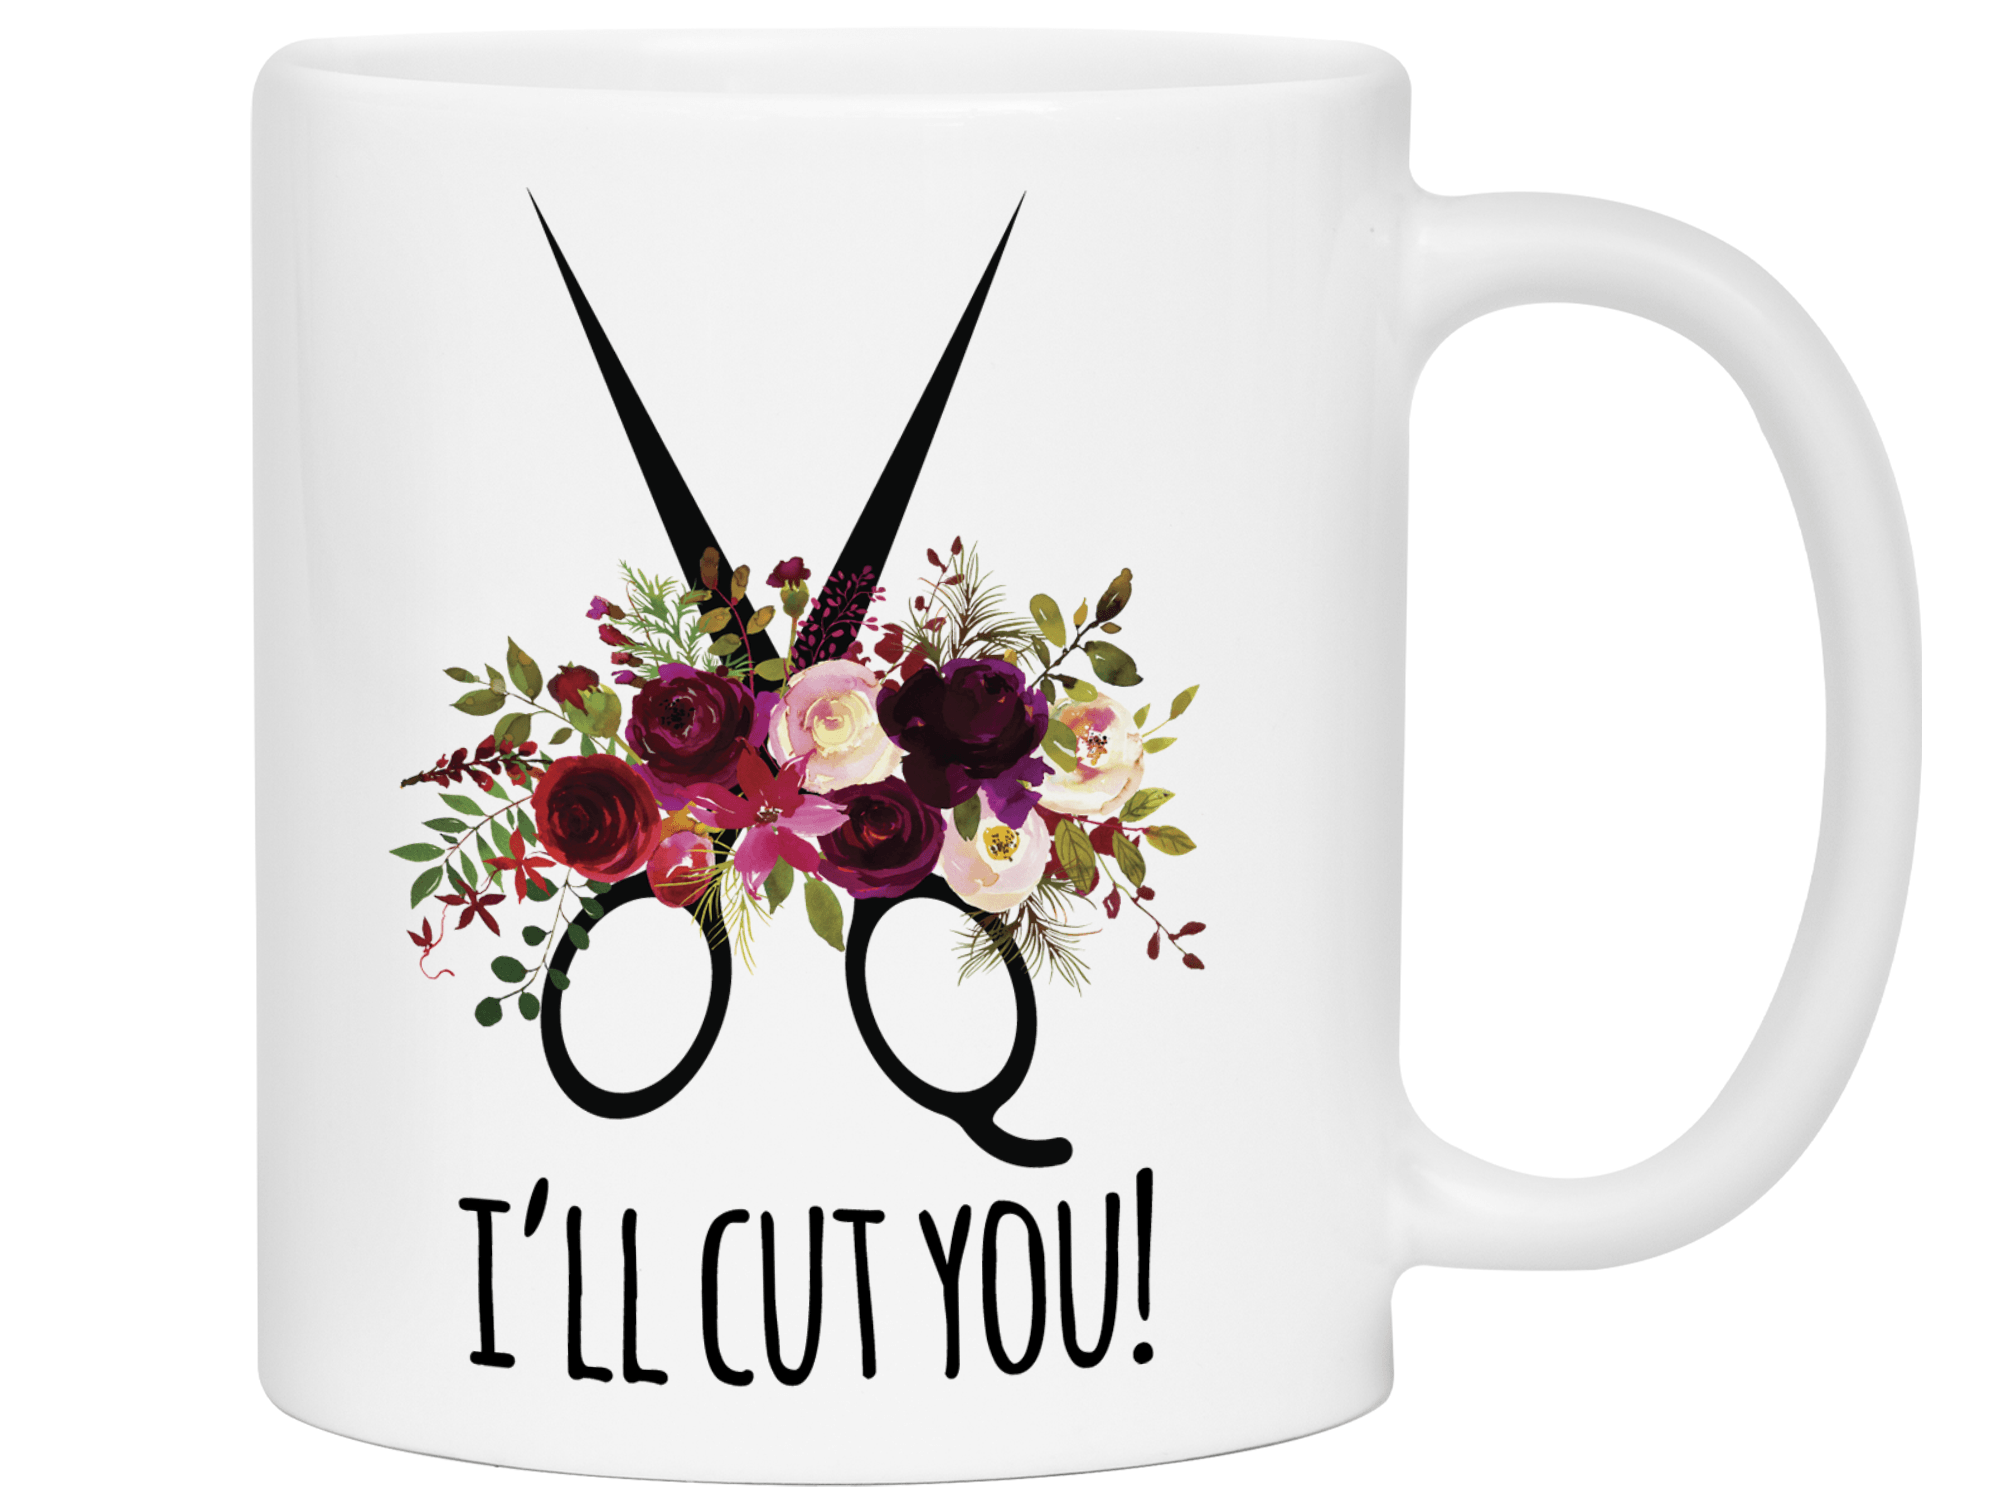 Funny Gifts for Hair Stylists, Barbers, Beauticians - I'll Cut You Funny Coffee Mug